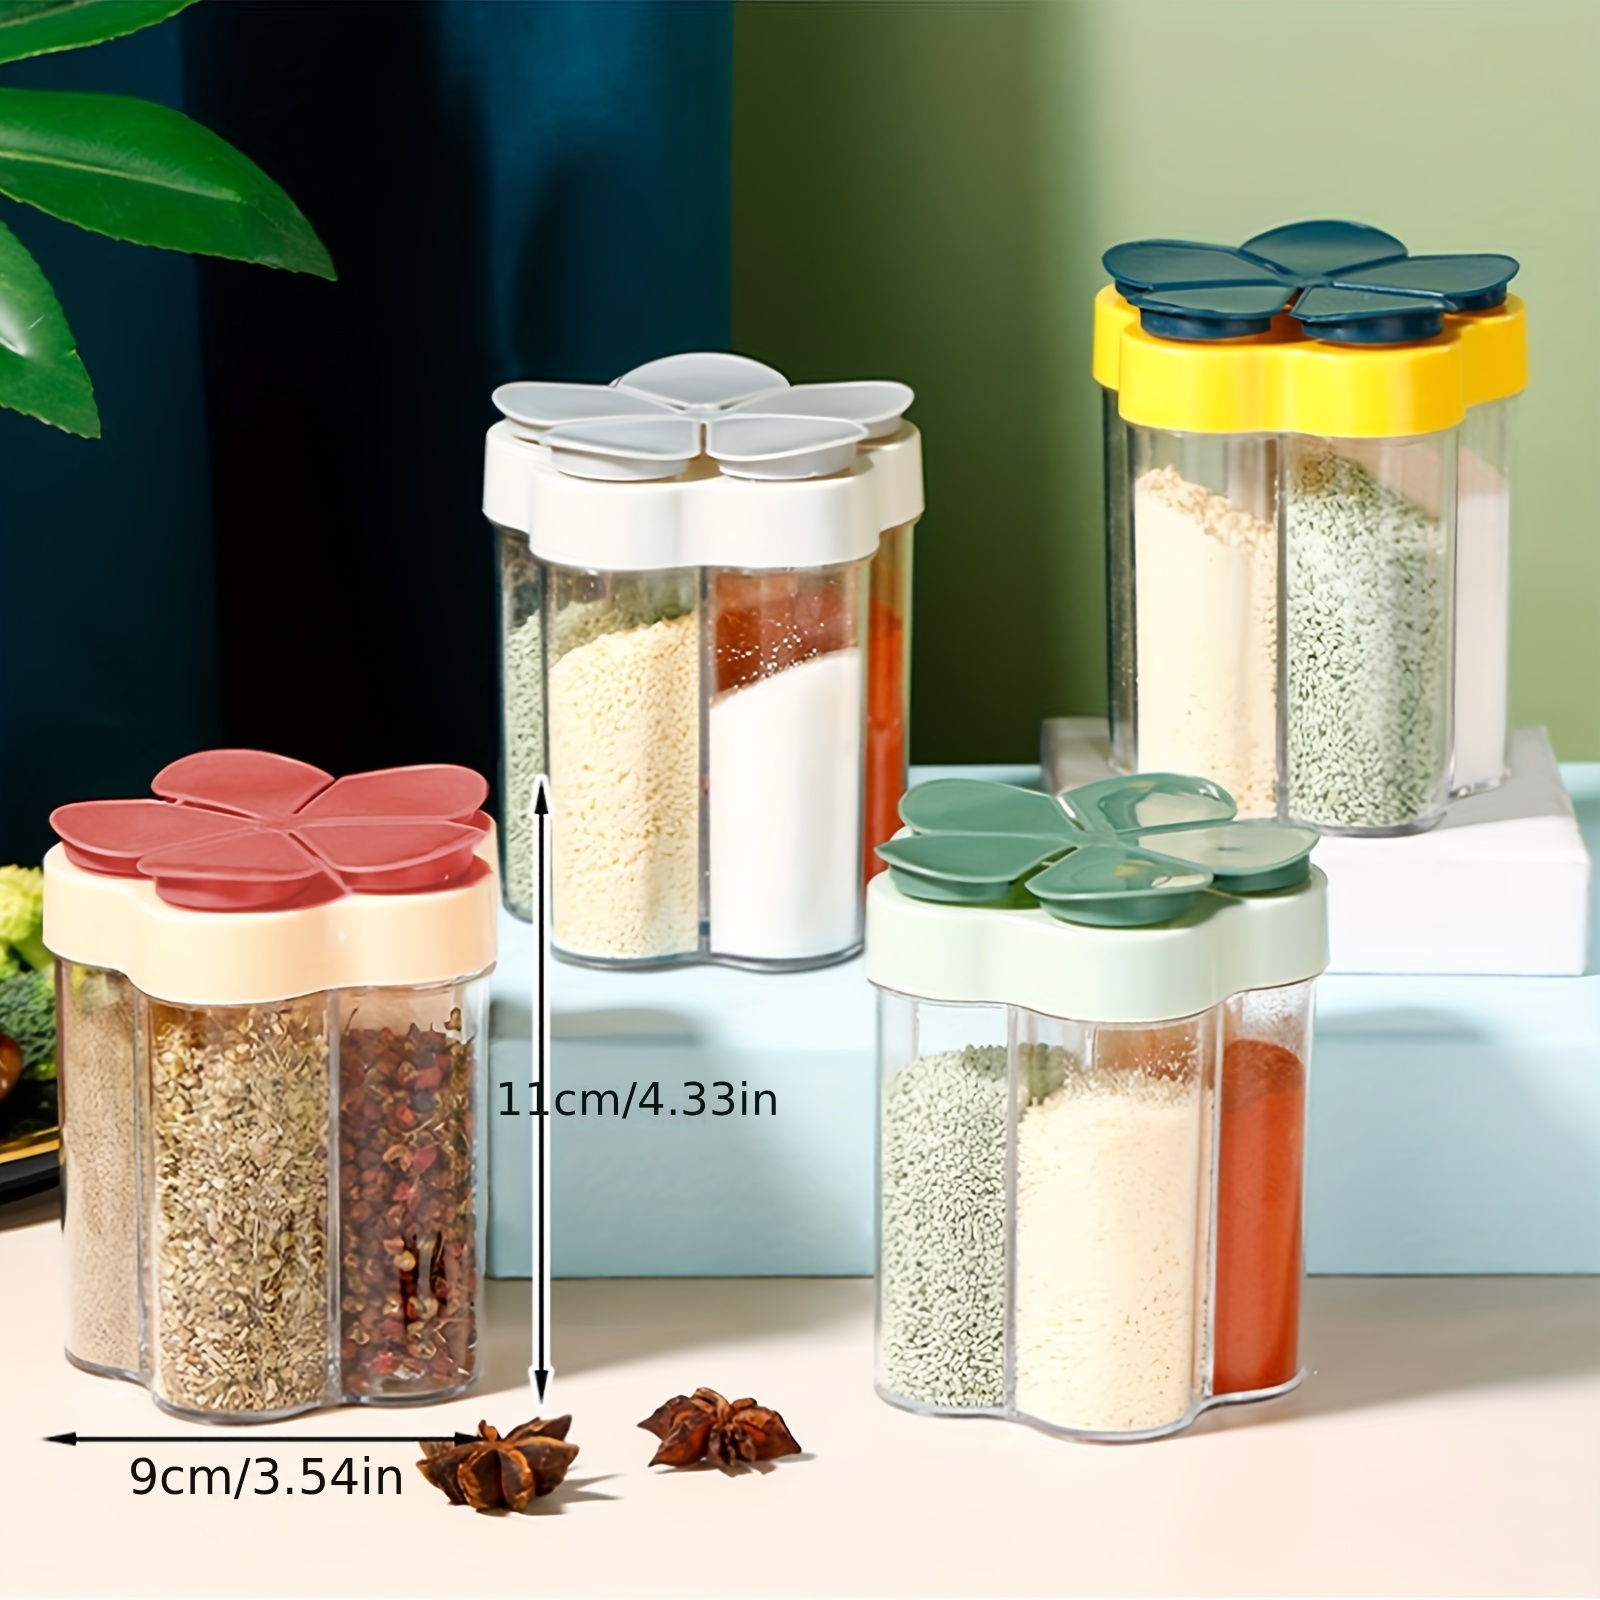 16 Pack 7oz Clear Plastic Spice Jars Storage Bottle Containers,Seasoning  Containers Bottles with Black Cap,Perfect for Storing Spice,Herbs and